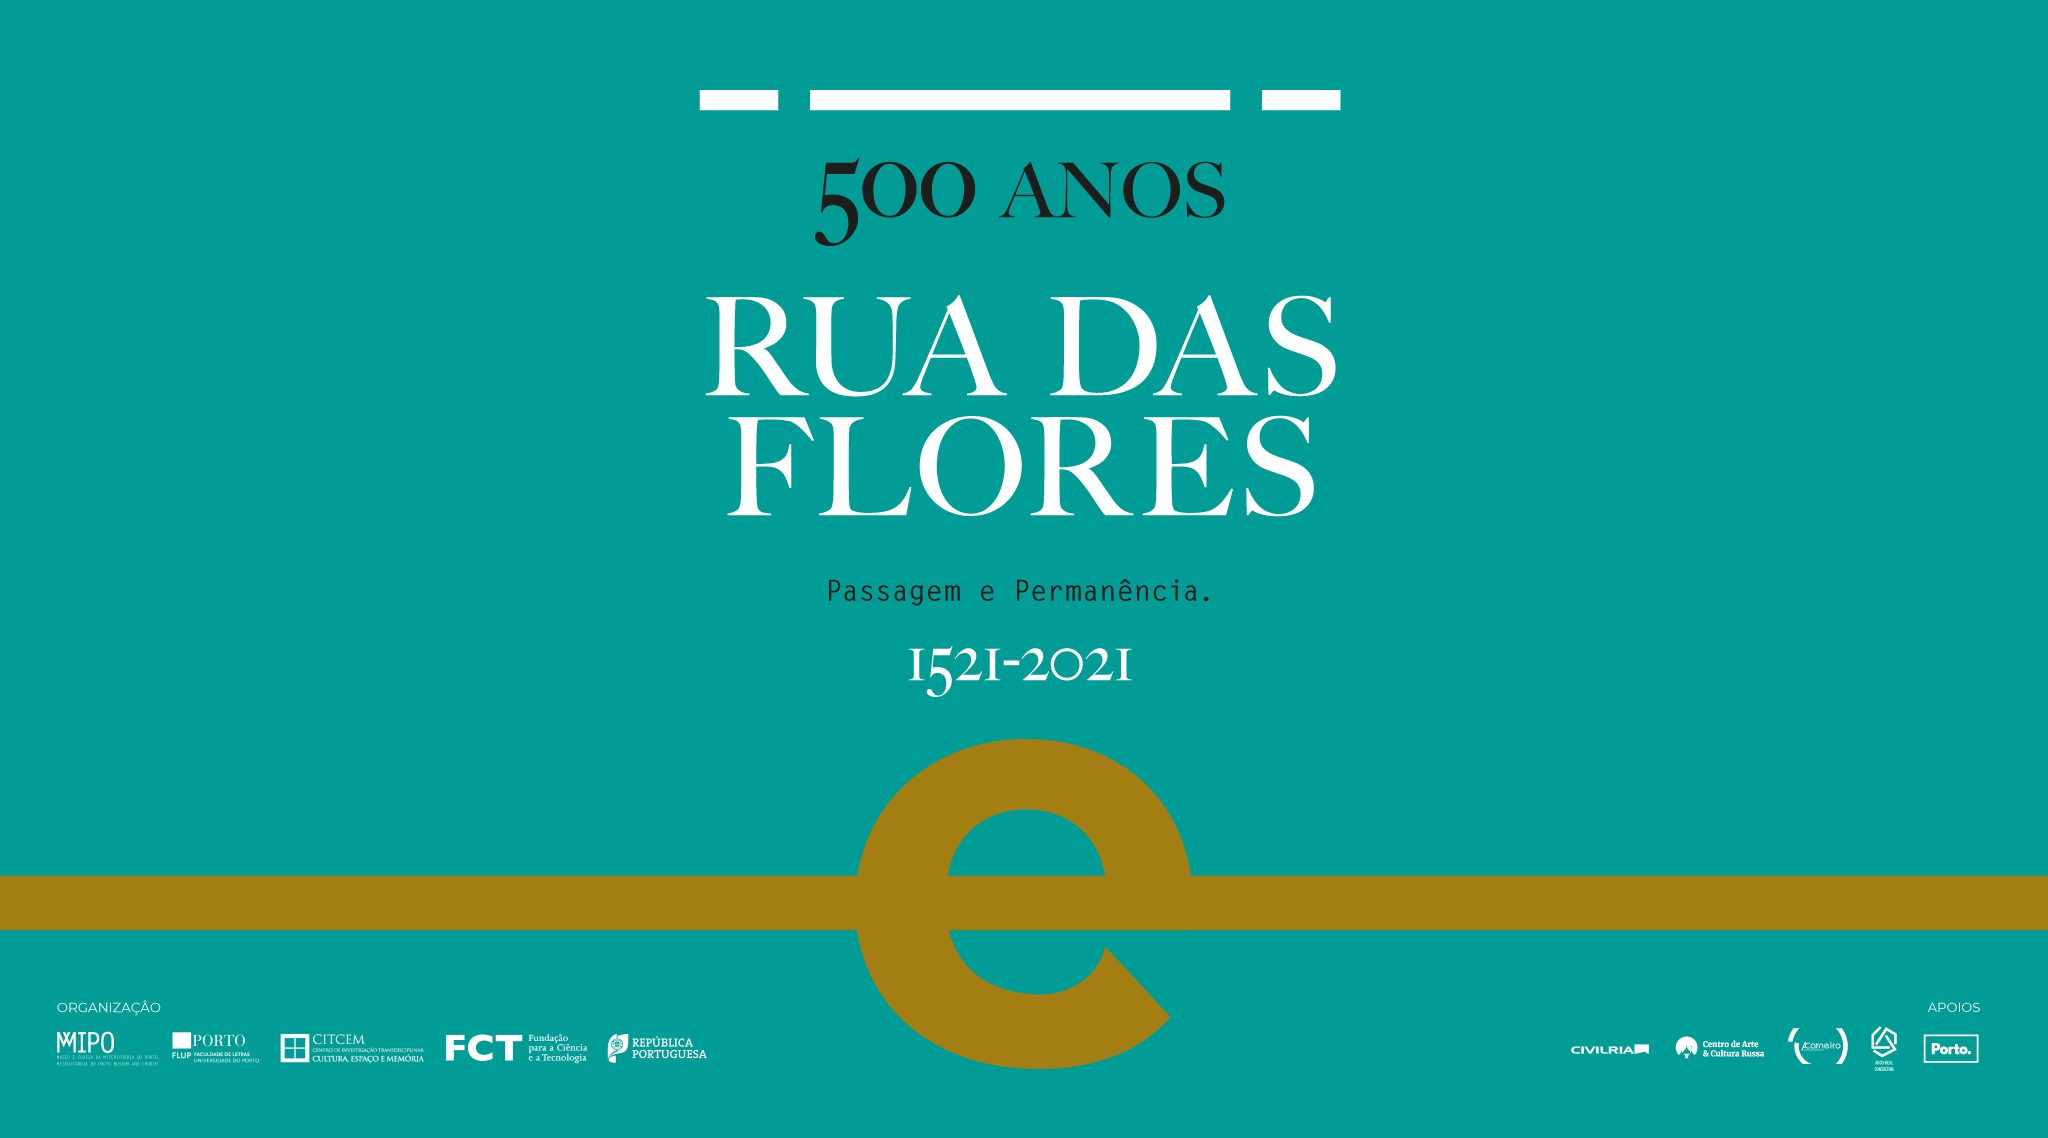 https://www.scmp.pt/assets/misc/img/noticias/2021/2021-11-05%20Newsletter/evento_FB_Rflores500_B.png